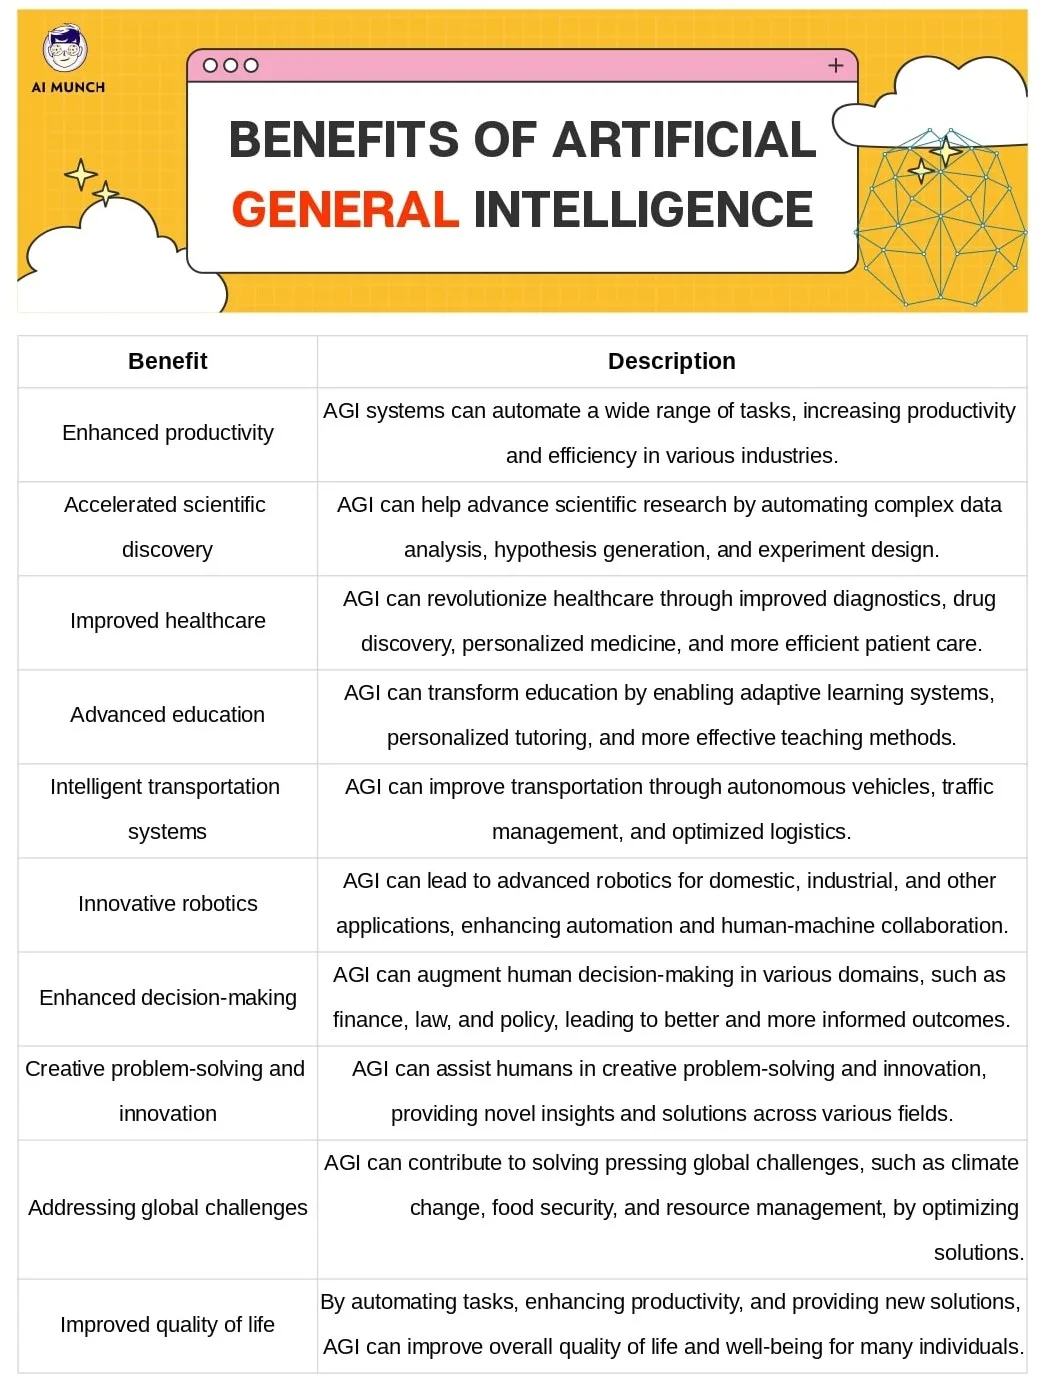 what is artificial general intelligence and benefits